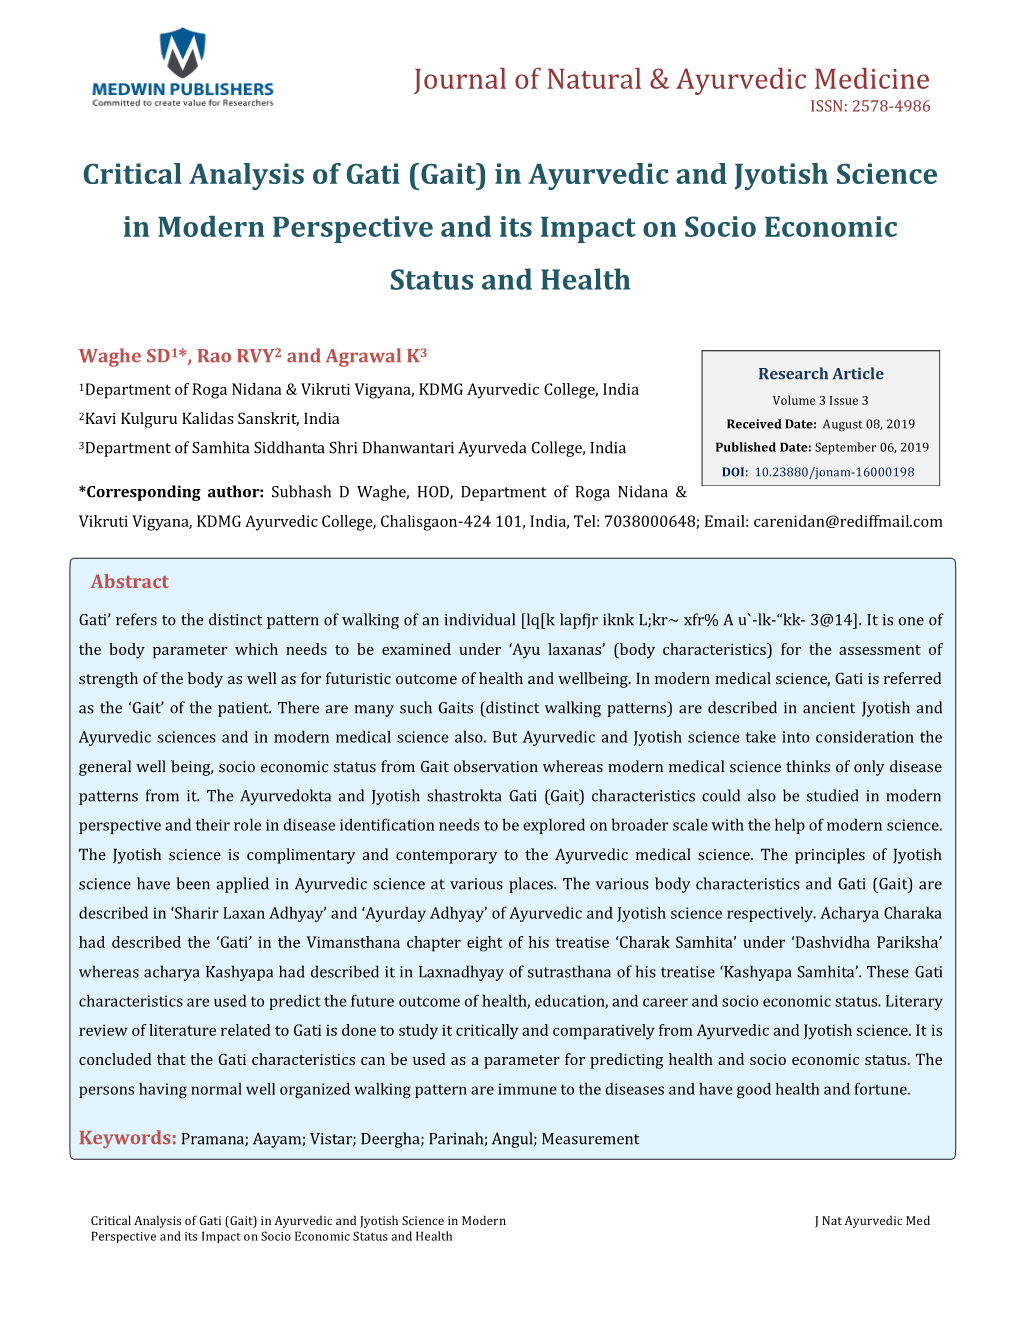 Critical Analysis of Gati (Gait) in Ayurvedic and Jyotish Science in Modern Perspective and Its Impact on Socio Economic Status and Health